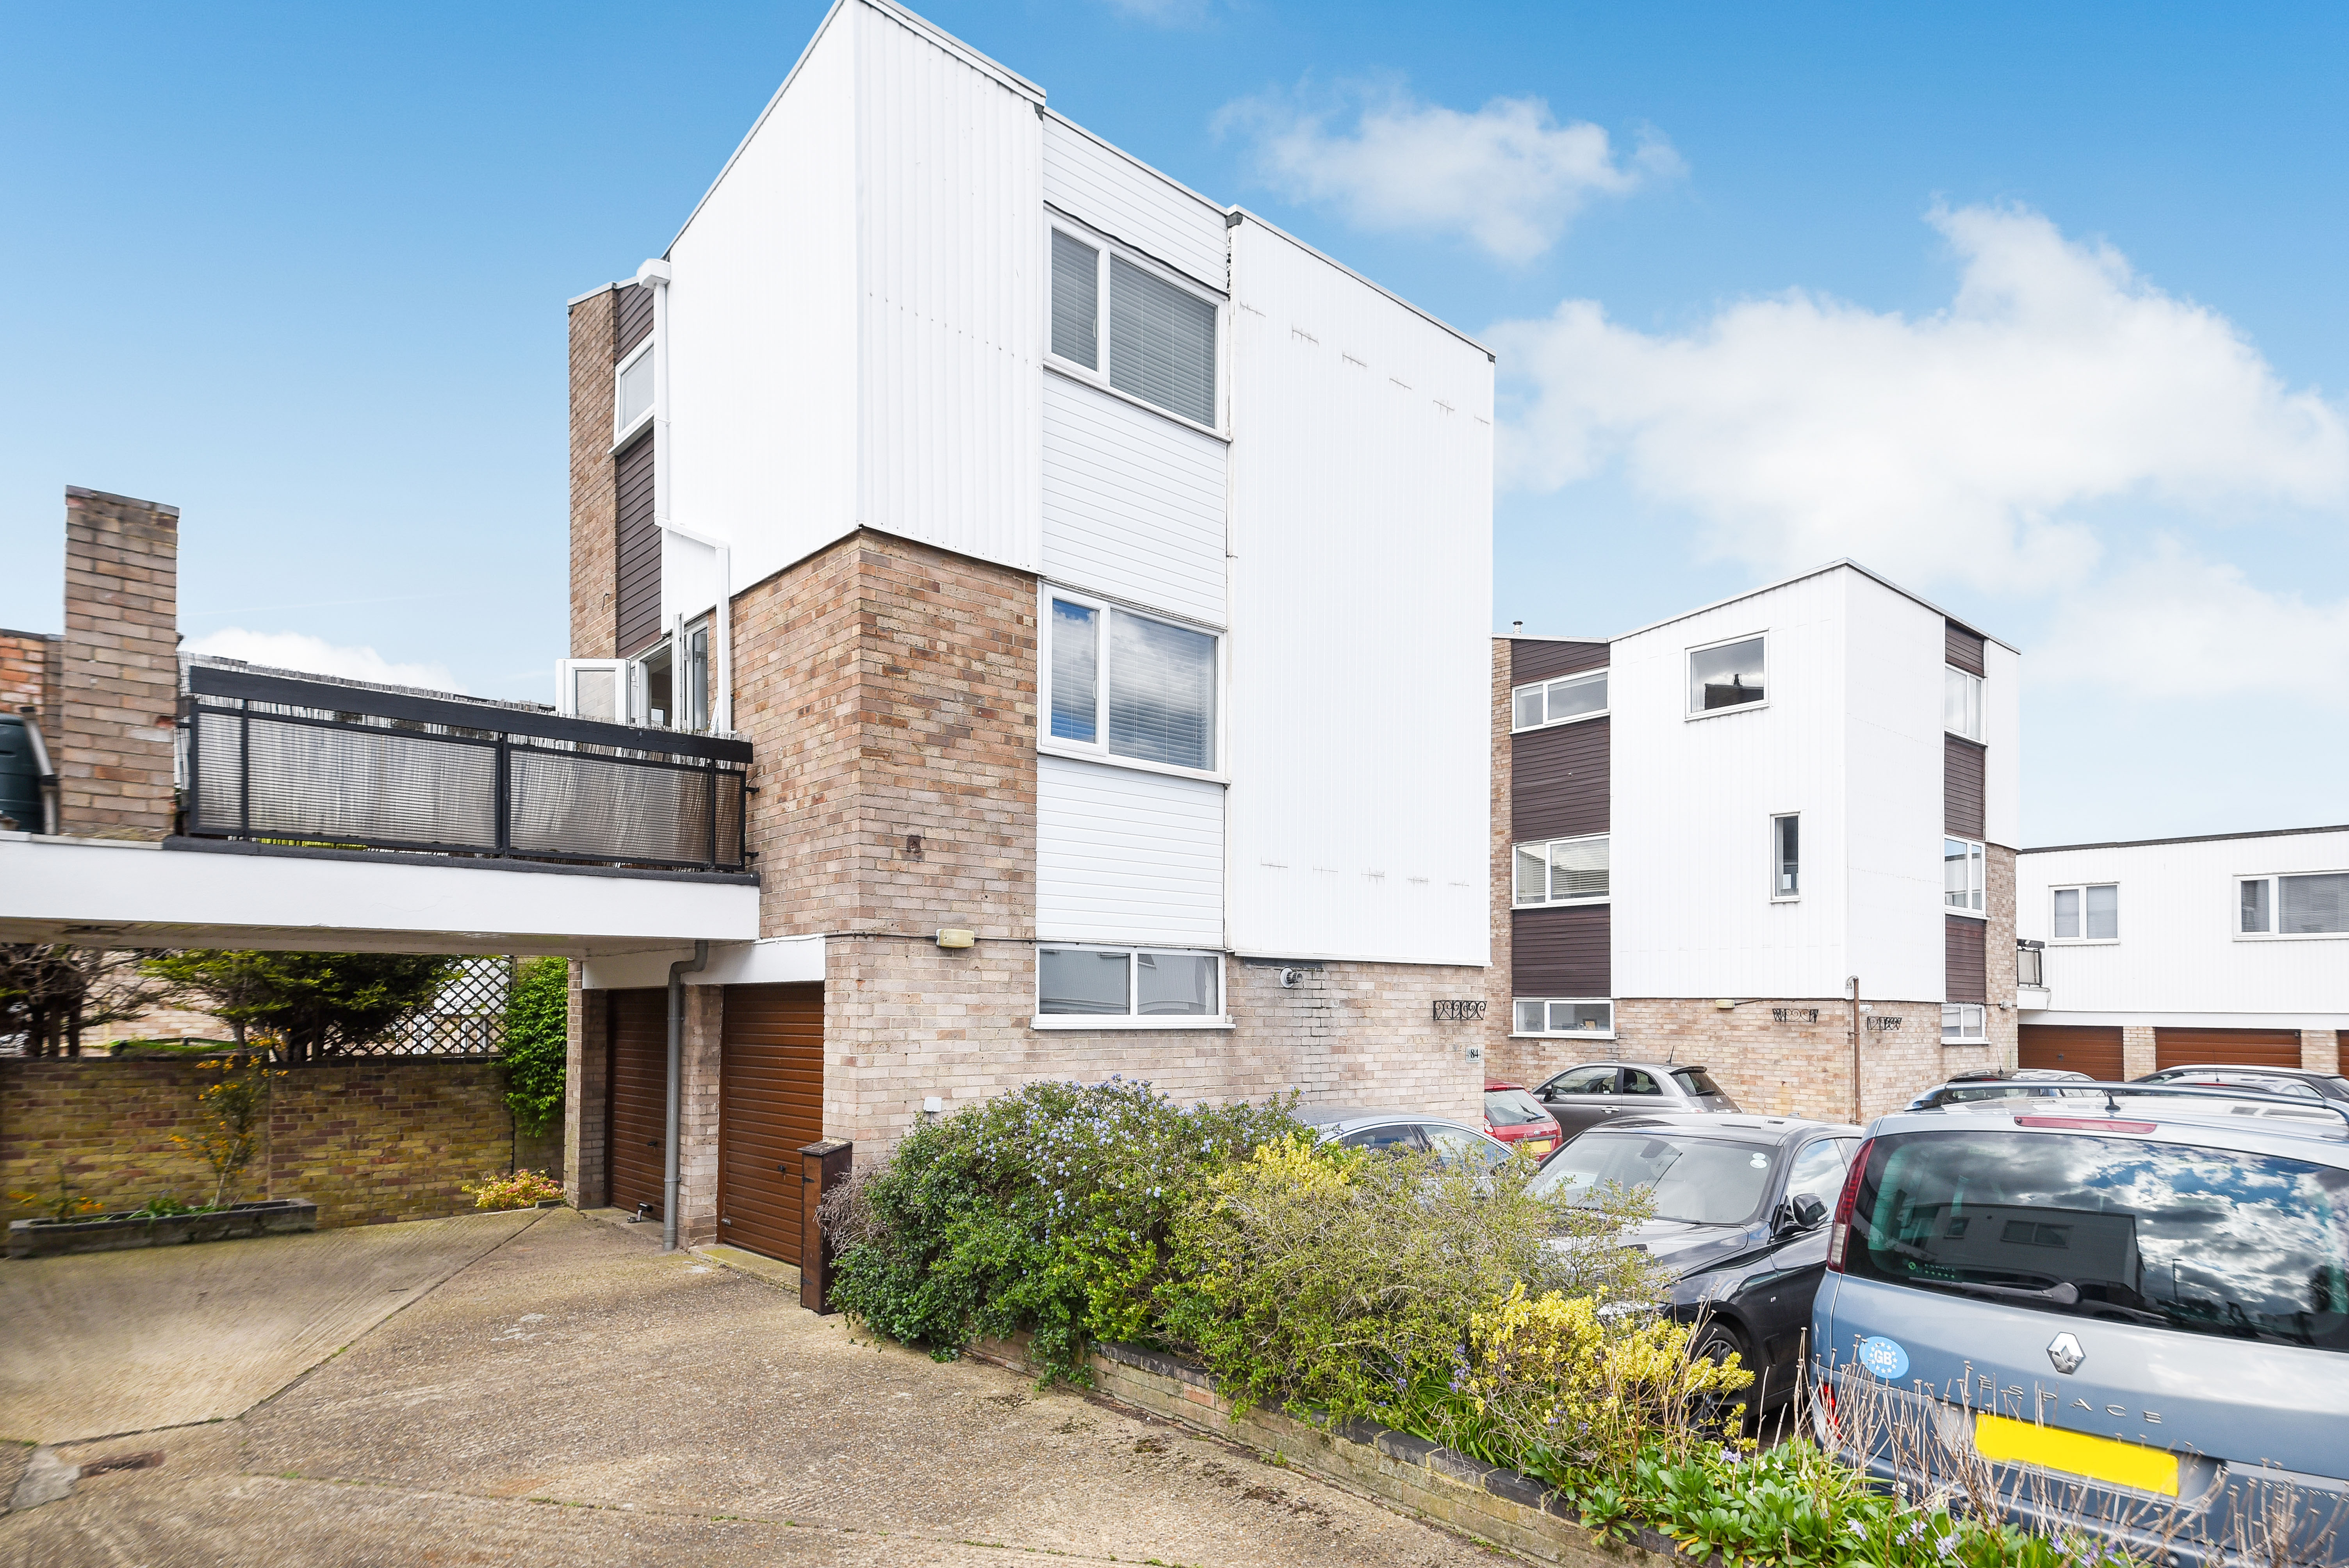 2 bed link detached house for sale in Ham View, Croydon - Property Image 1